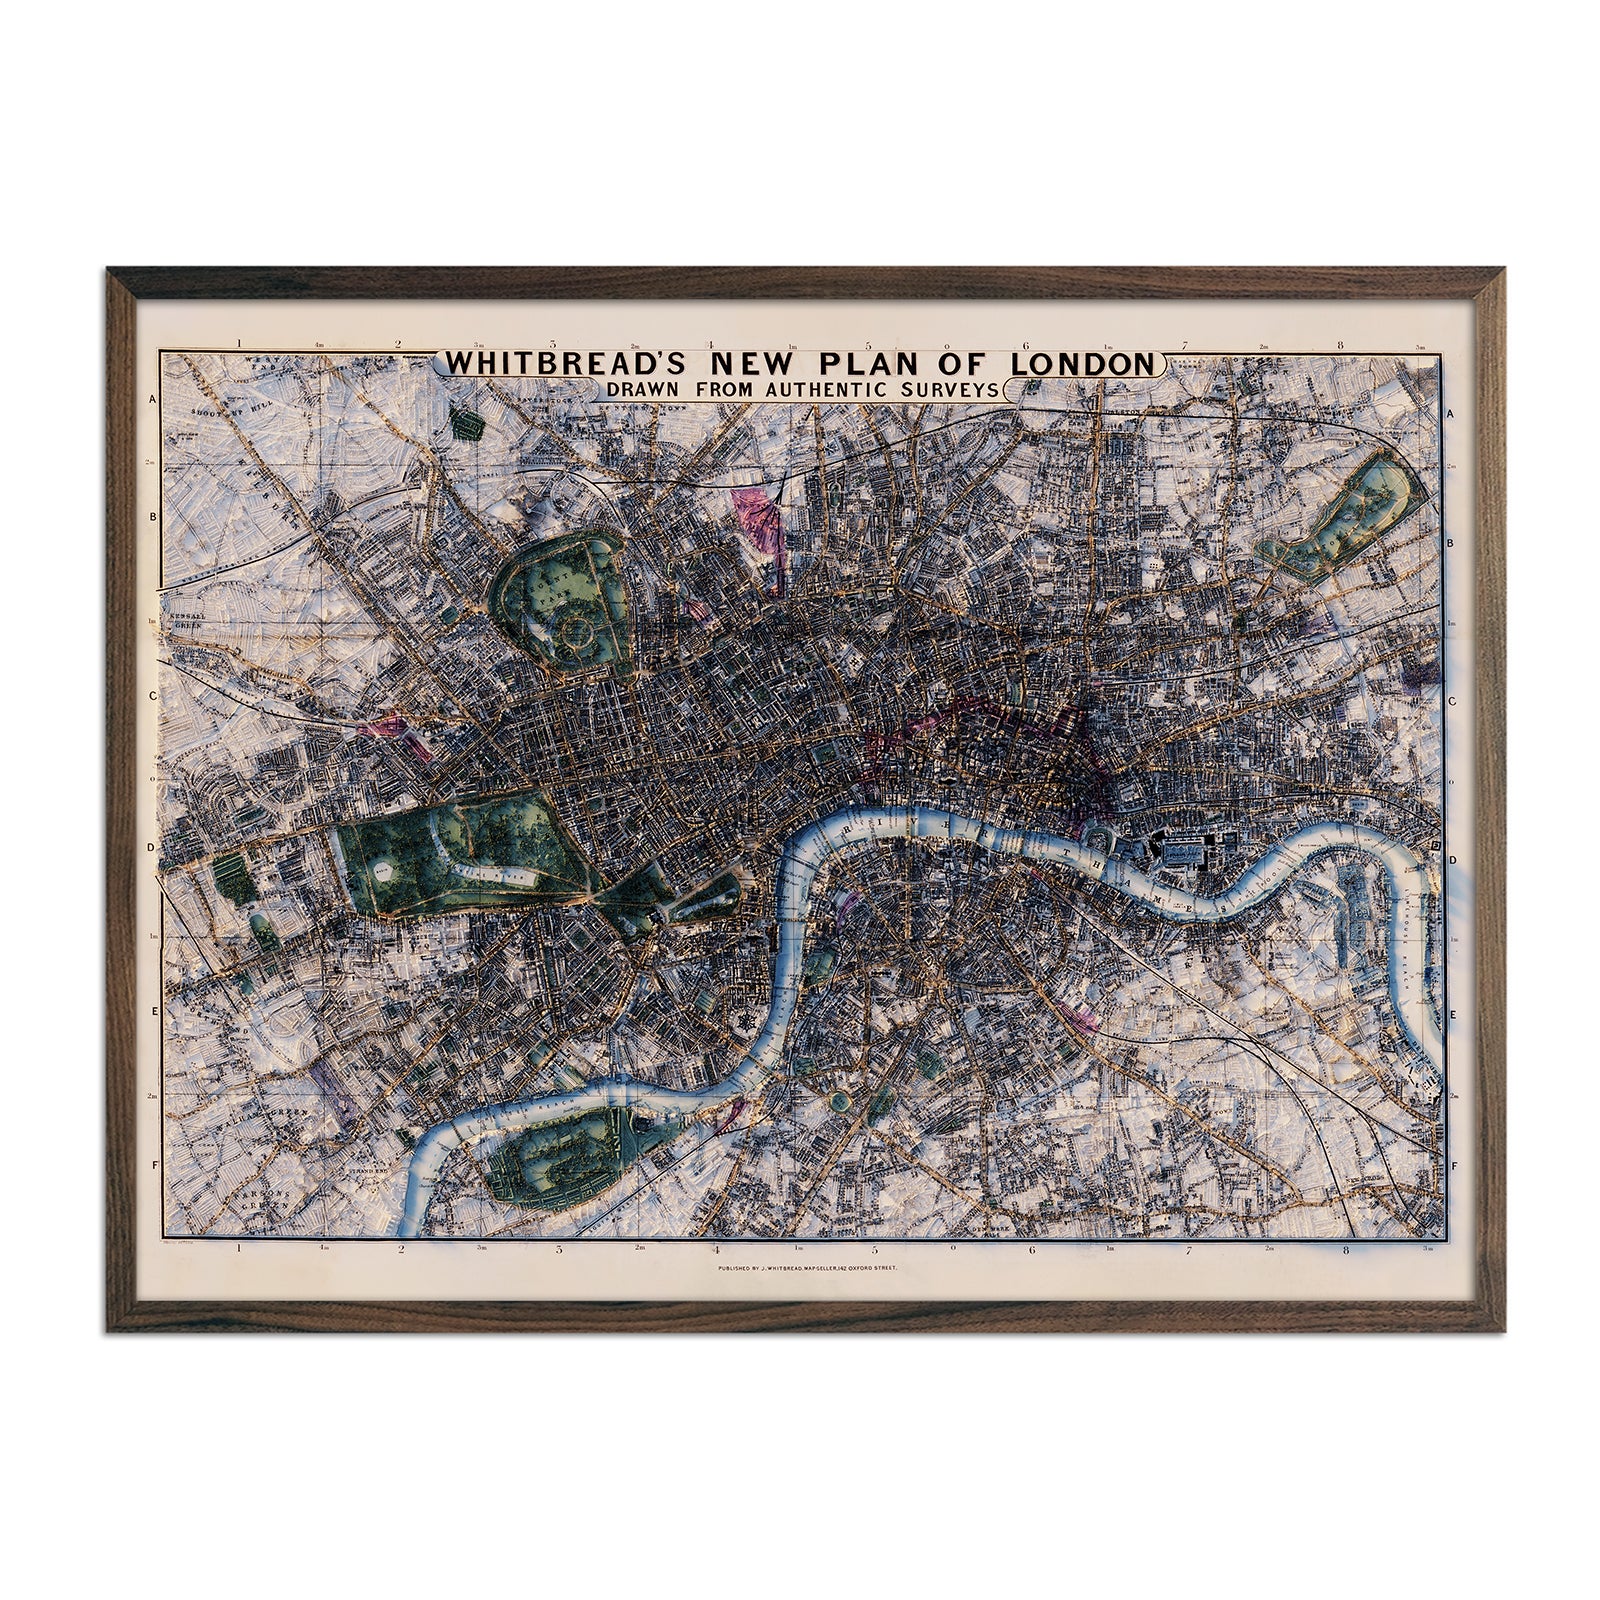 London-Whitbread's New Plan 1853 Relief Map